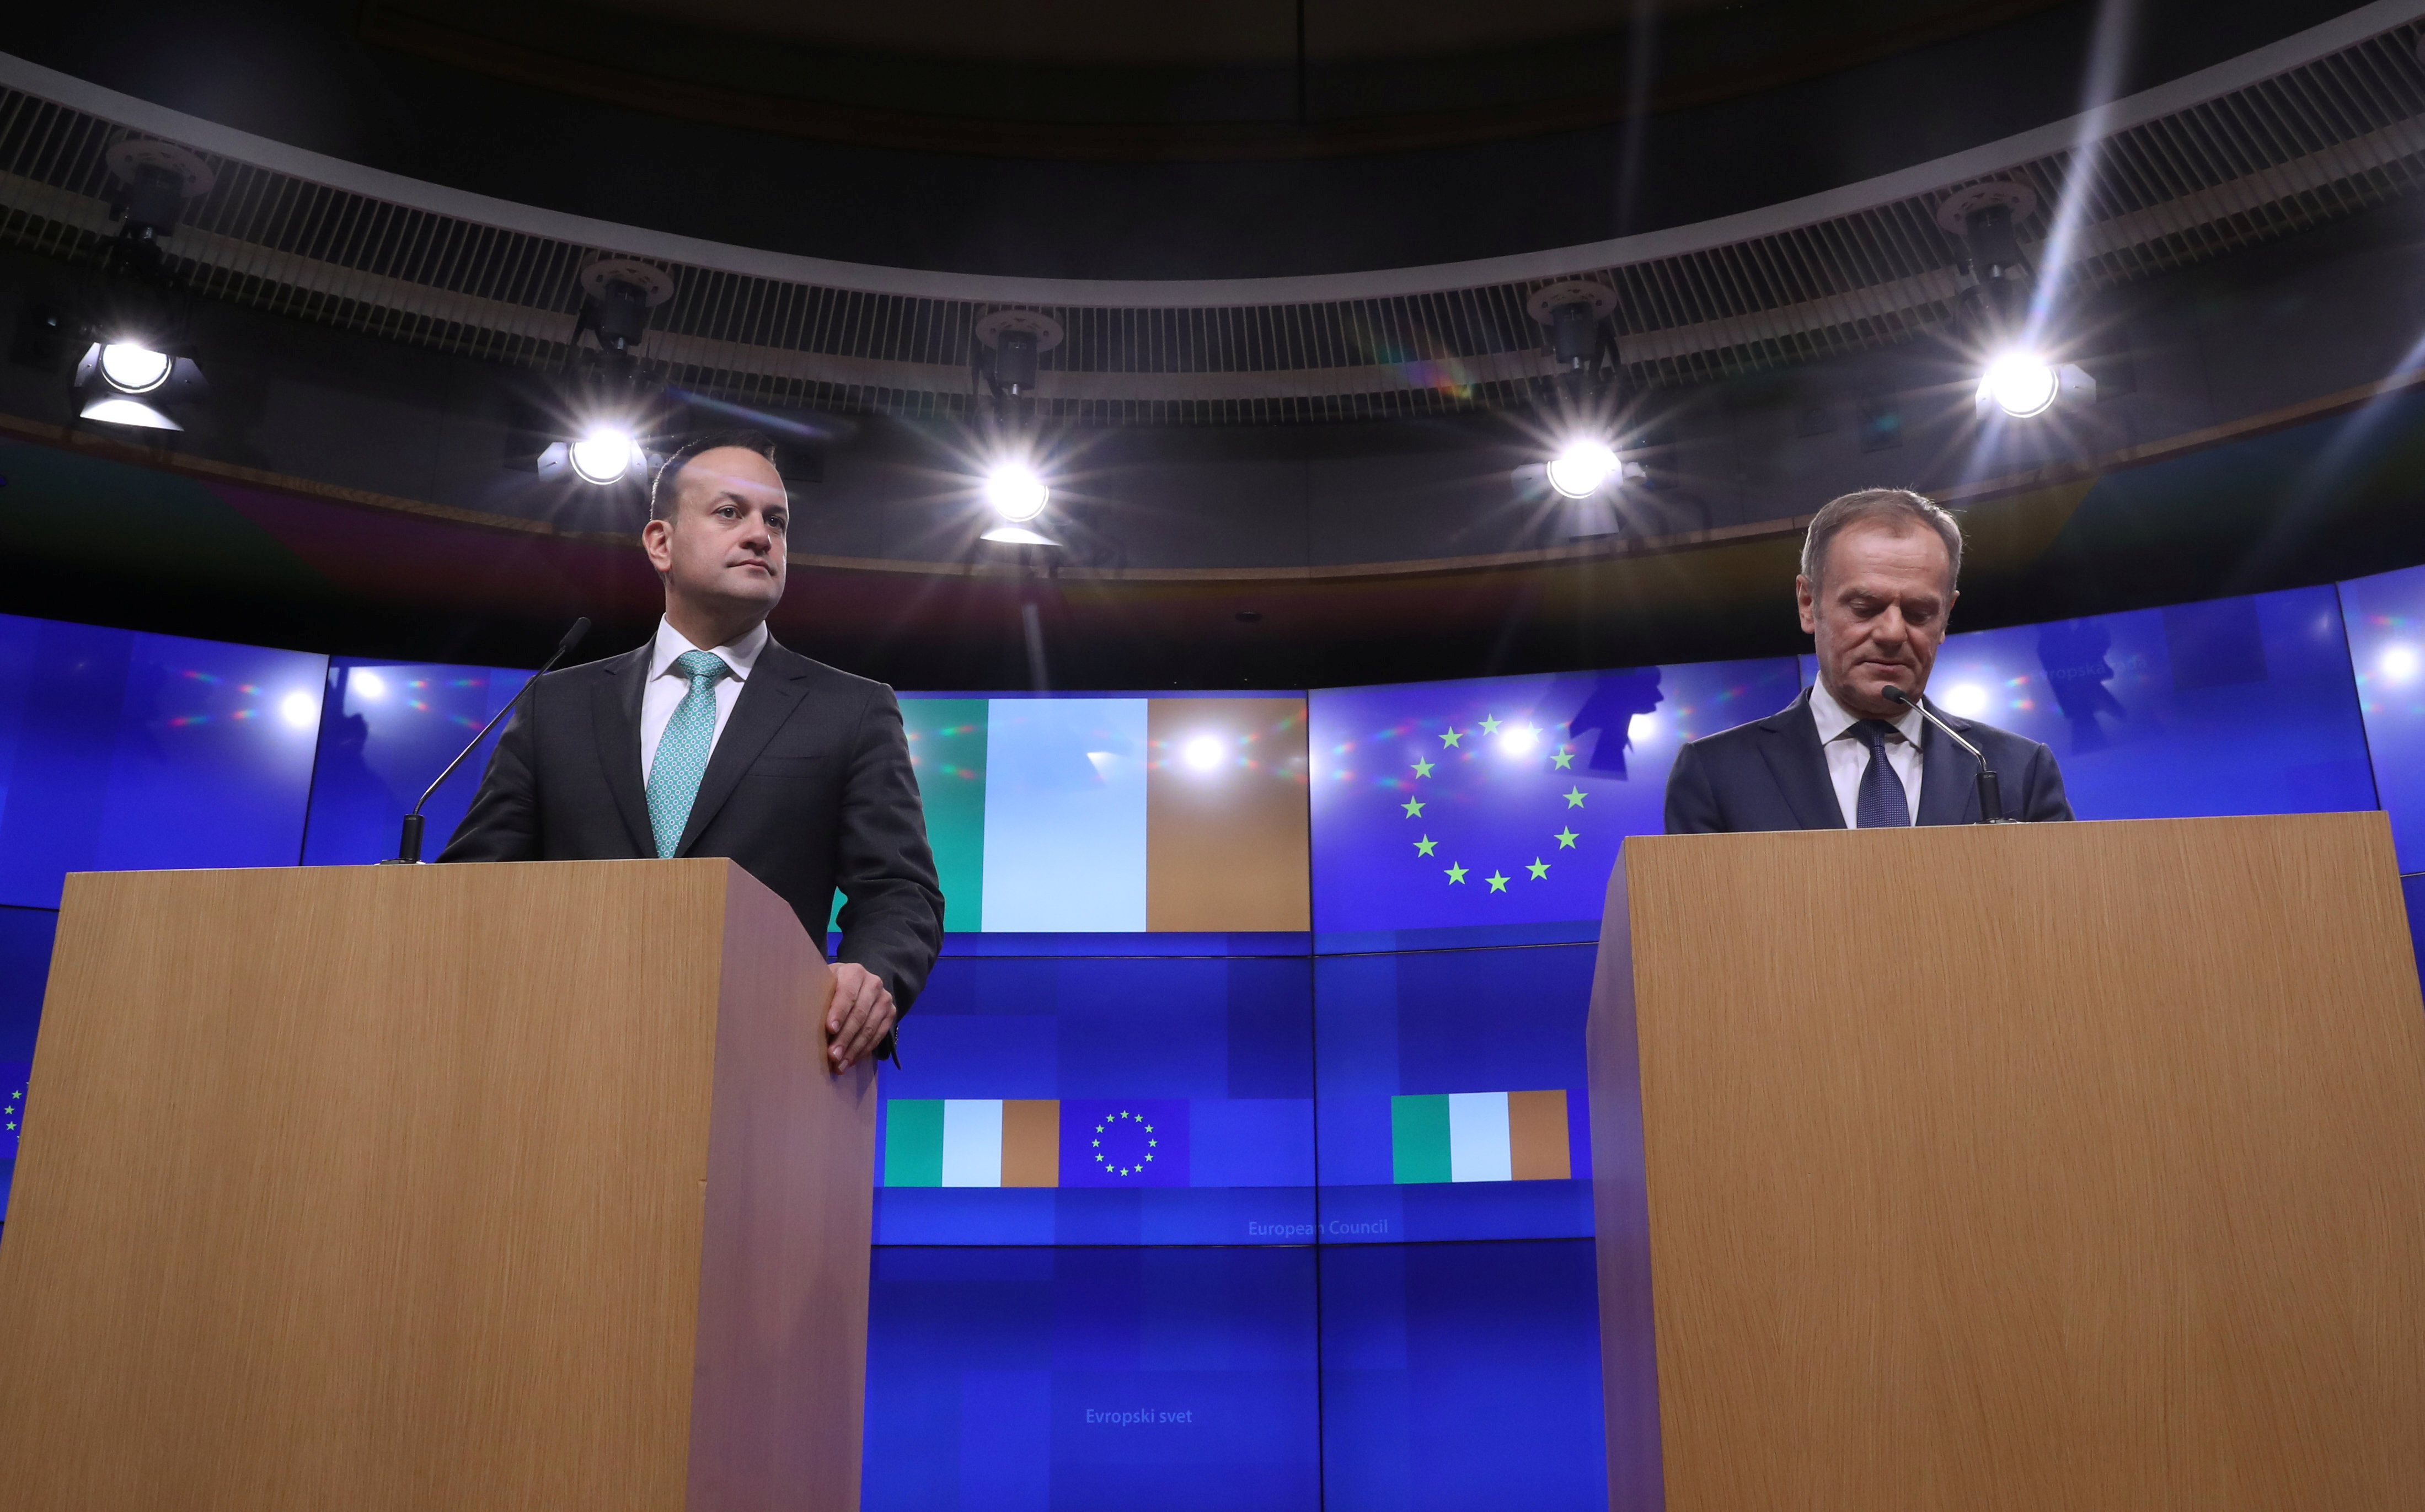 EU Council President Donald Tusk and Irish Prime Minister Leo Varadkar give statements after a meeting at the European Council headquarters in Brussels, Belgium February 6, 2019. (REUTERS/Yves Herman)